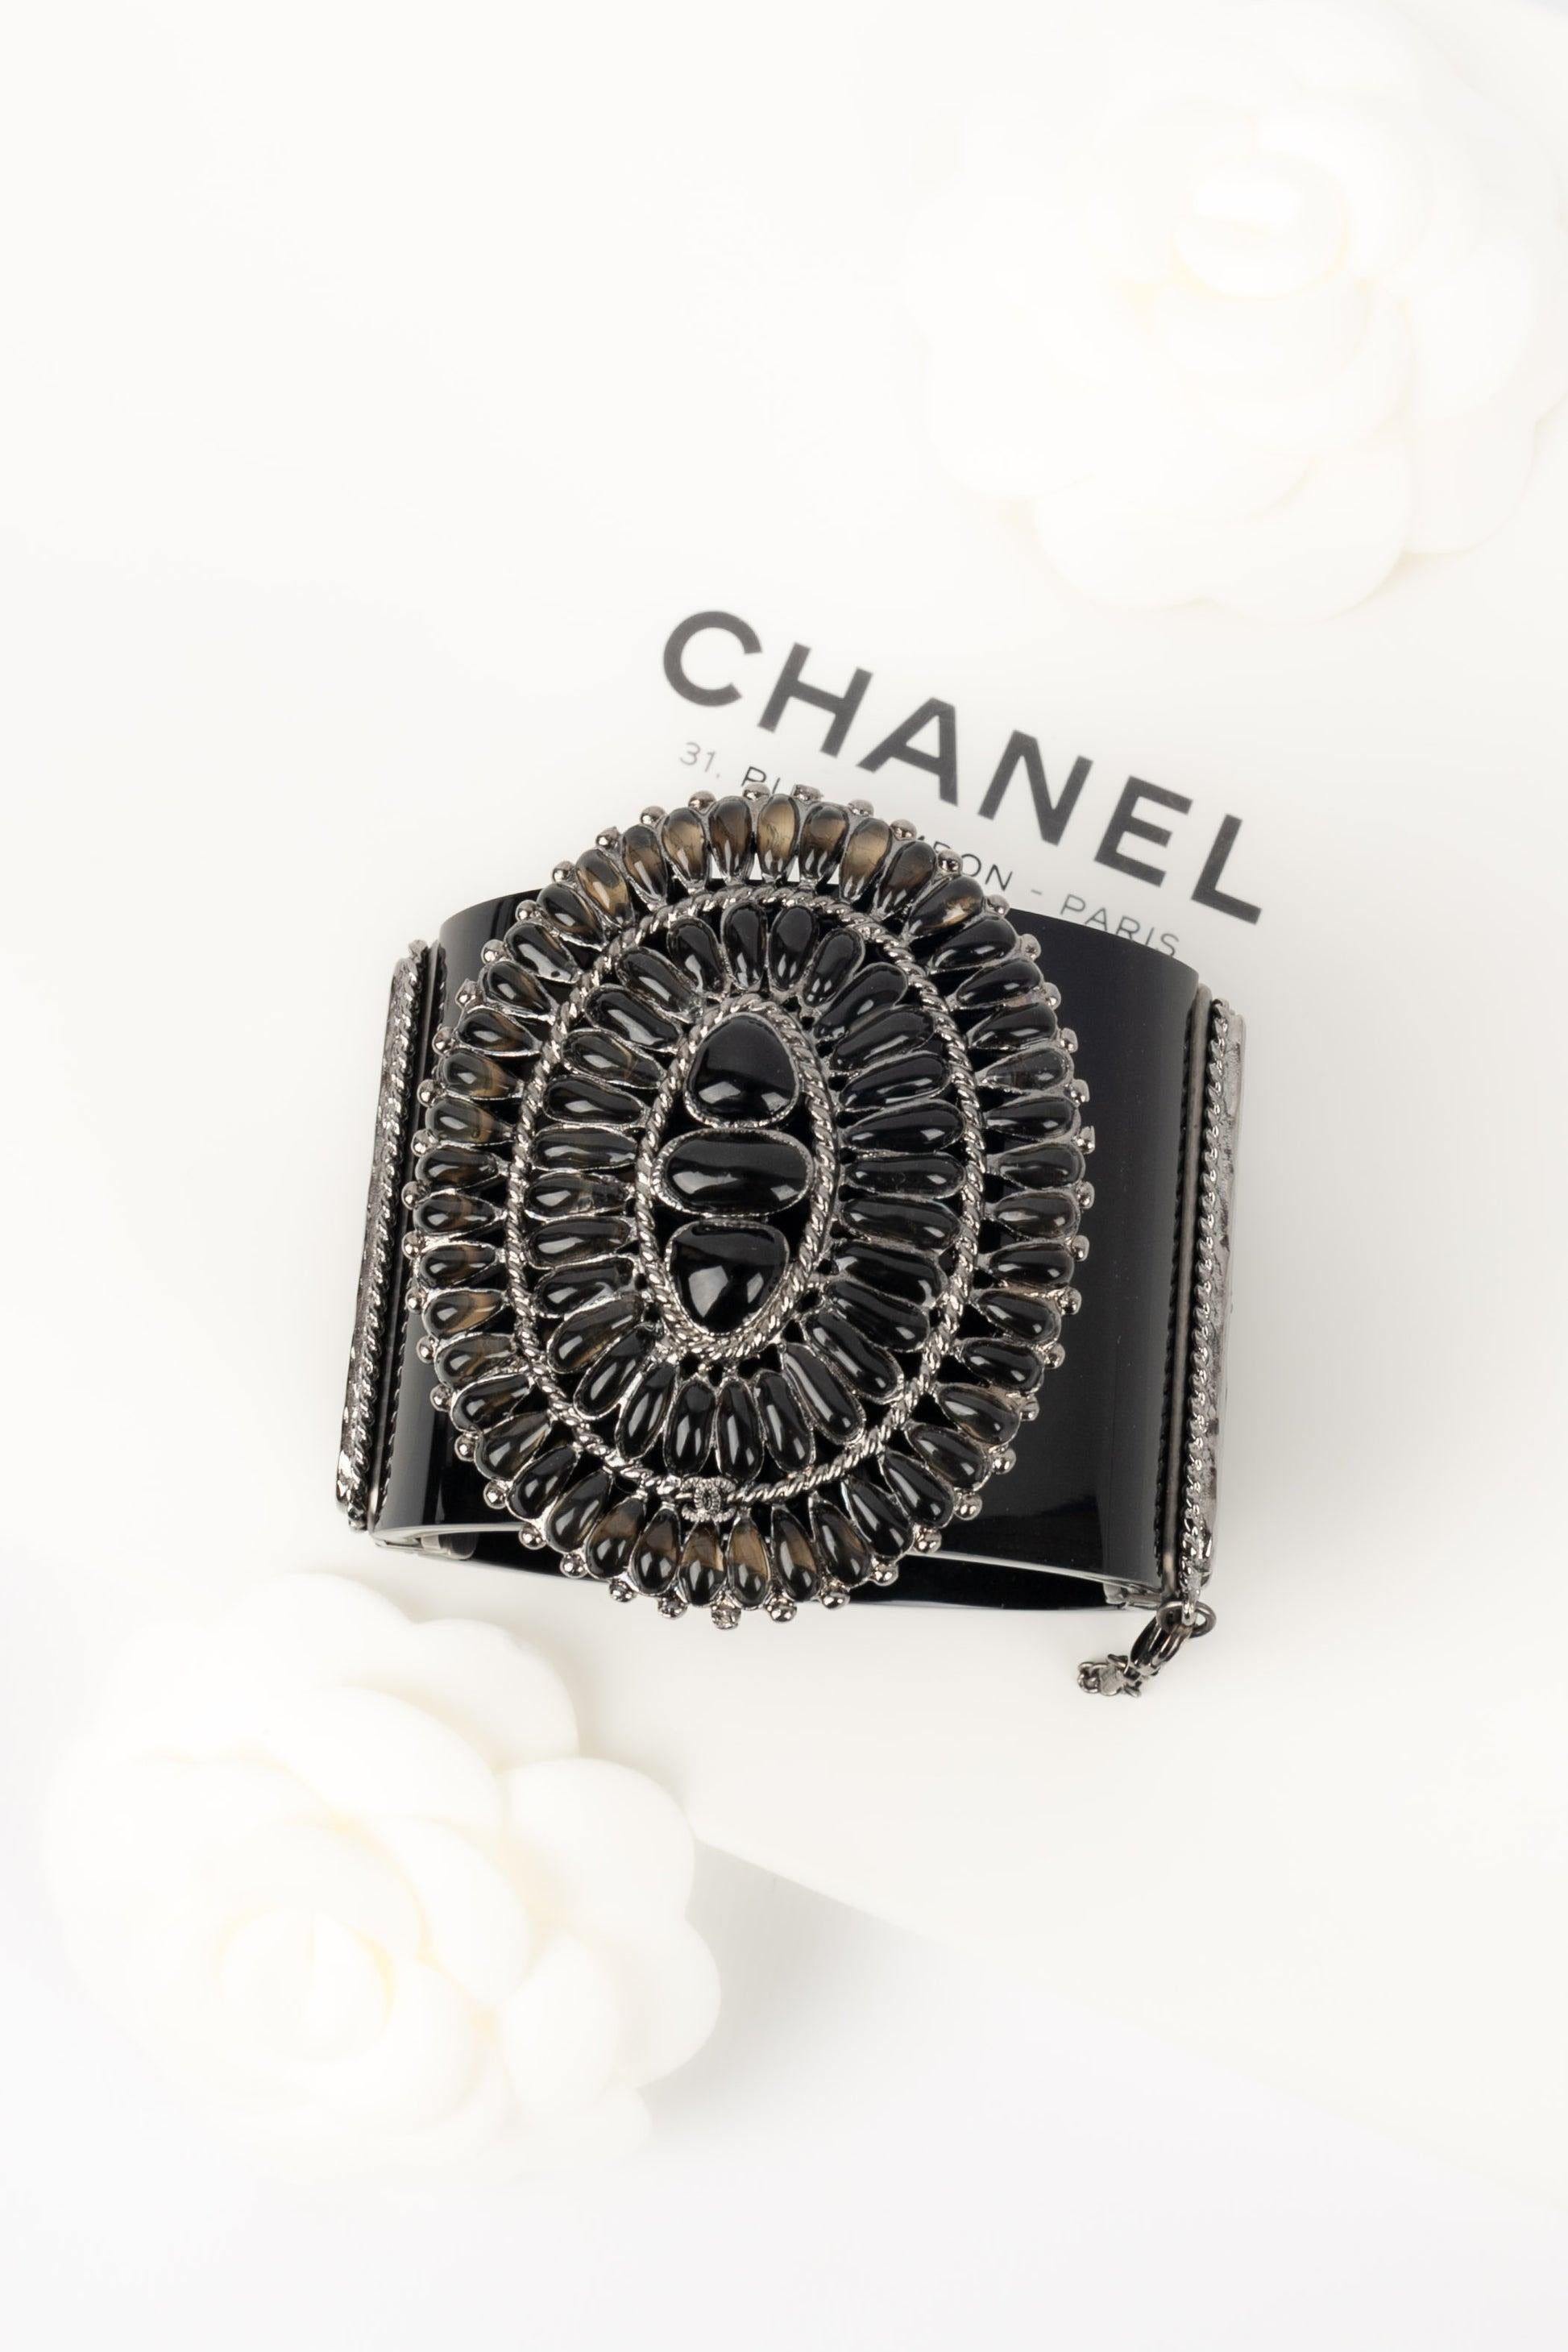 Chanel - (Made in France) Cuff bracelet in black bakelite, silvery metal, and resin.

Additional information:
Condition: Very good condition
Dimensions: Height: 5 cm - Length: 18 cm - Opening: 8 cm

Seller Reference: BRAB114